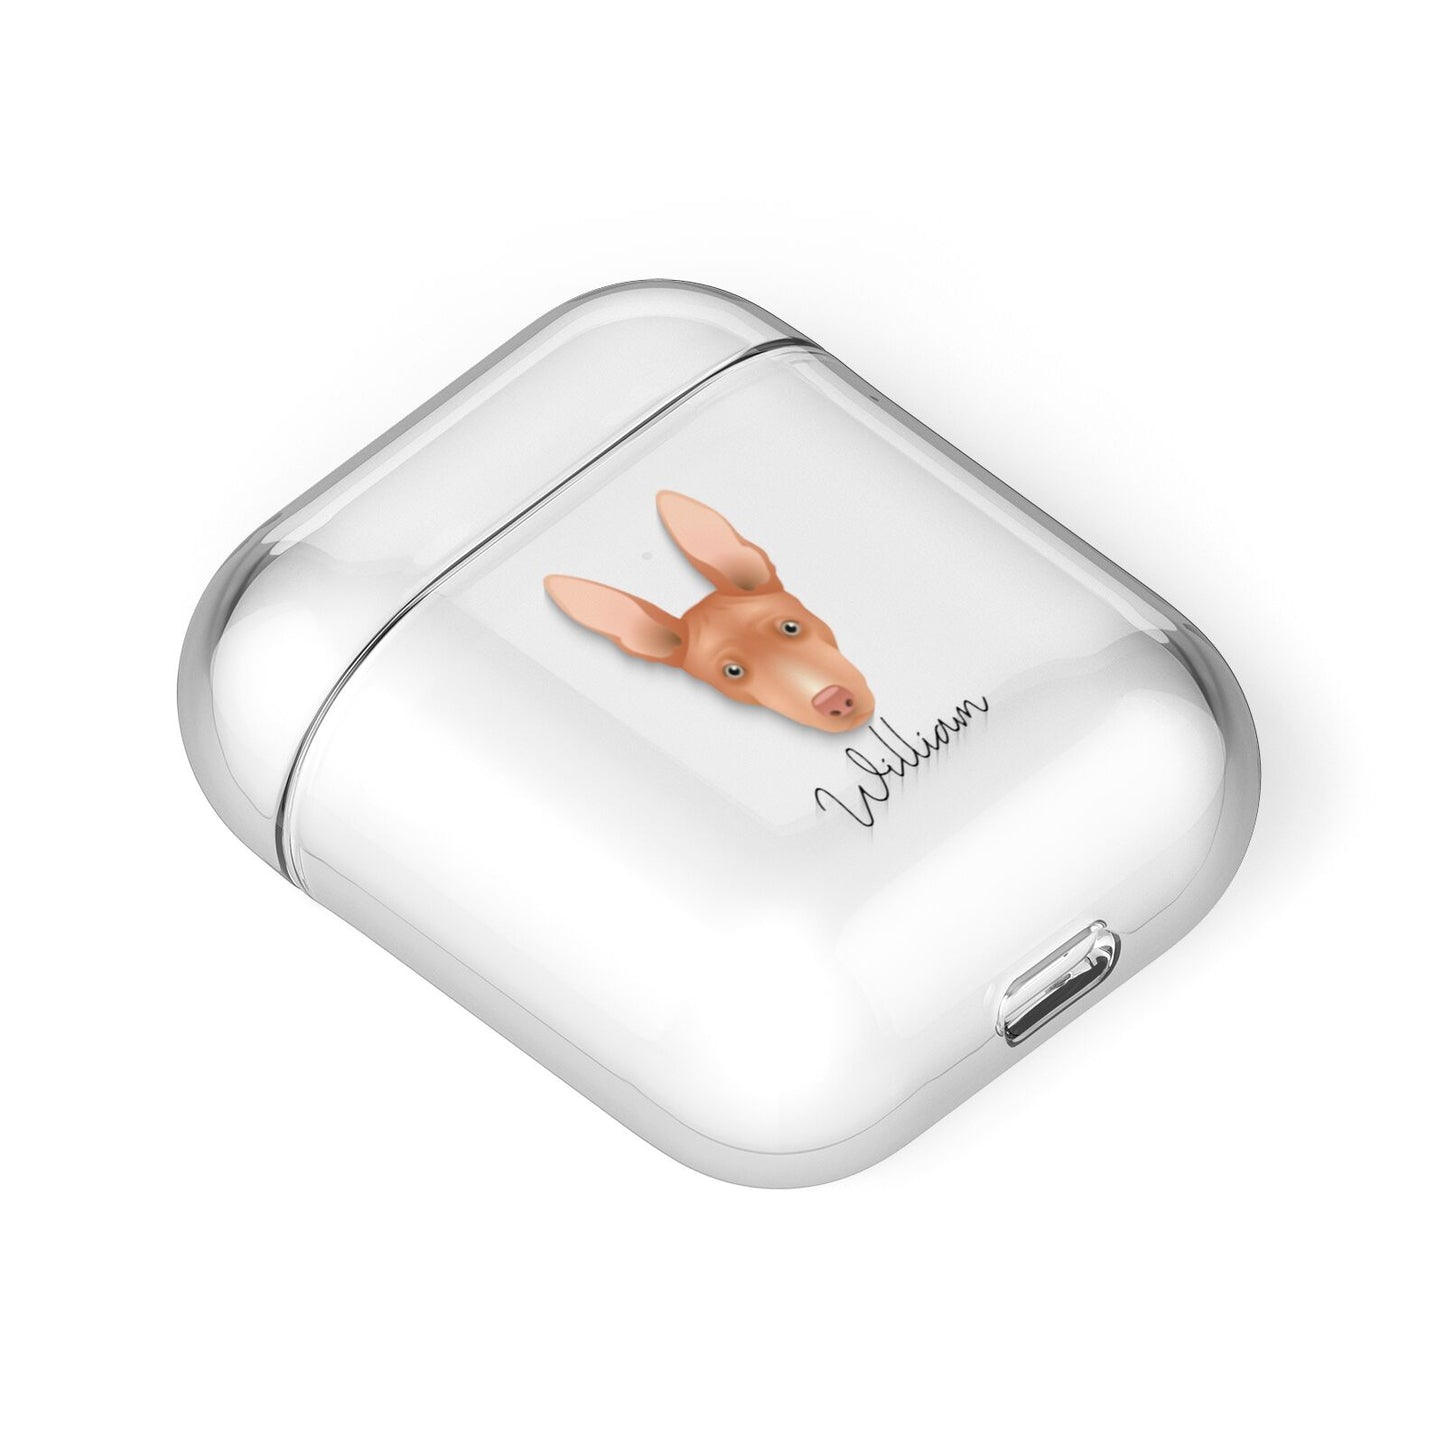 Cirneco Dell Etna Personalised AirPods Case Laid Flat